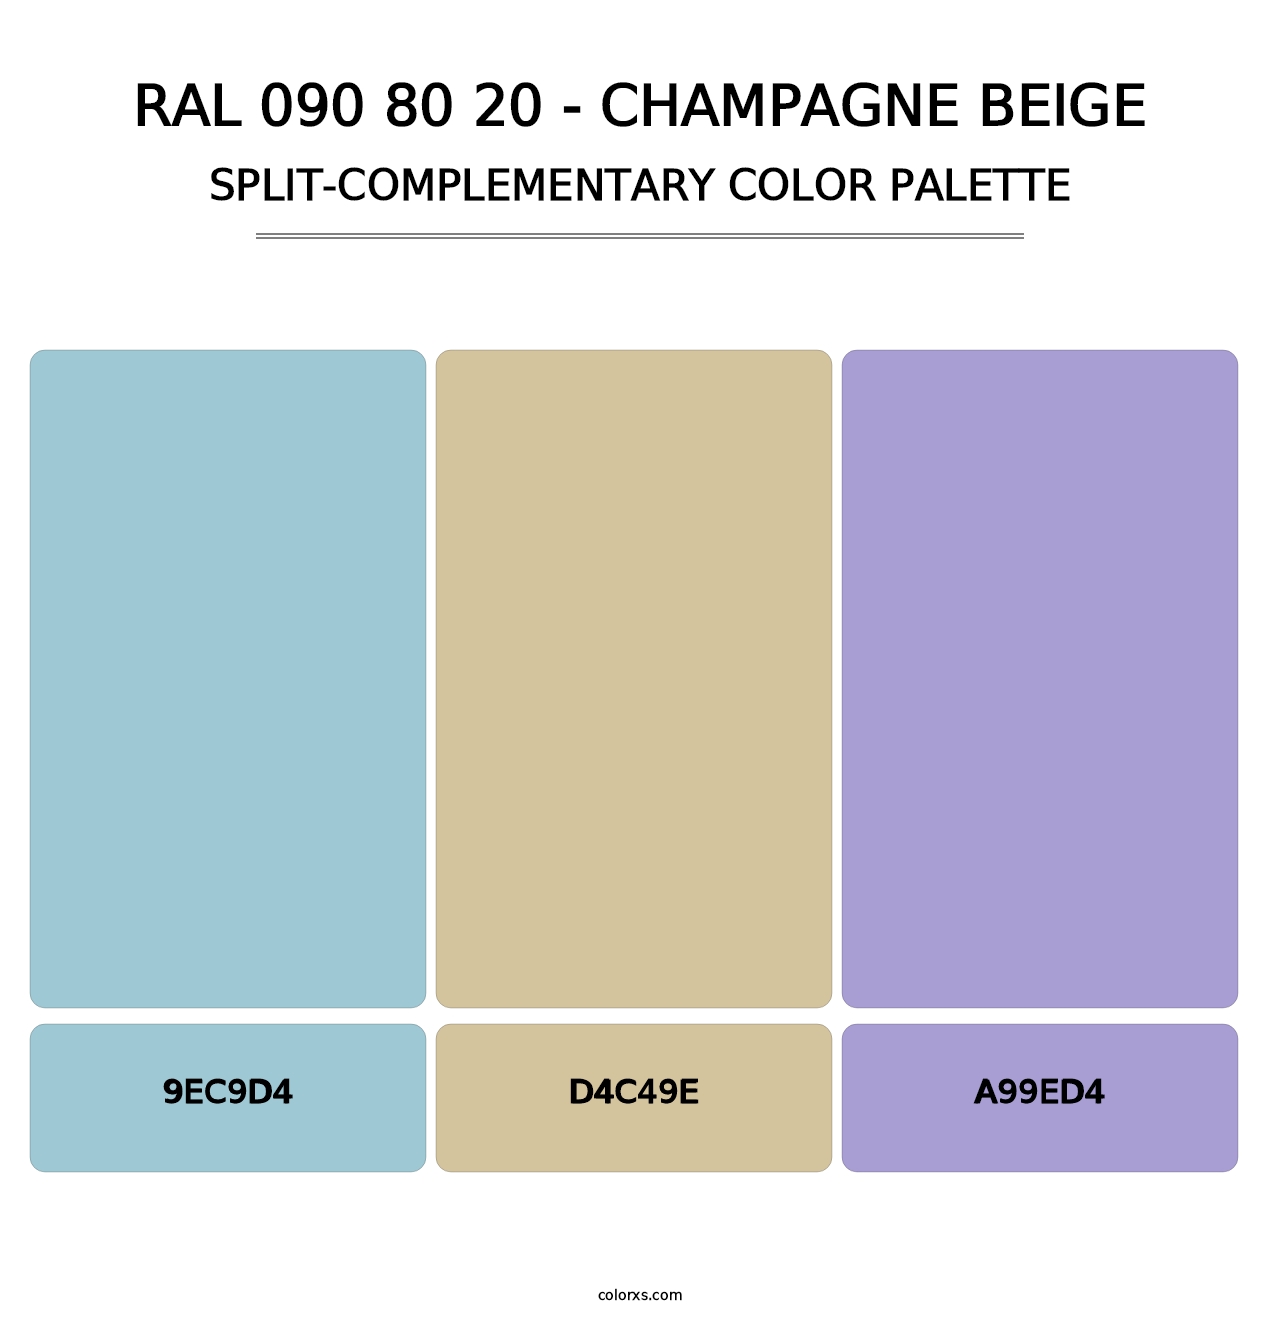 RAL 090 80 20 - Champagne Beige - Split-Complementary Color Palette